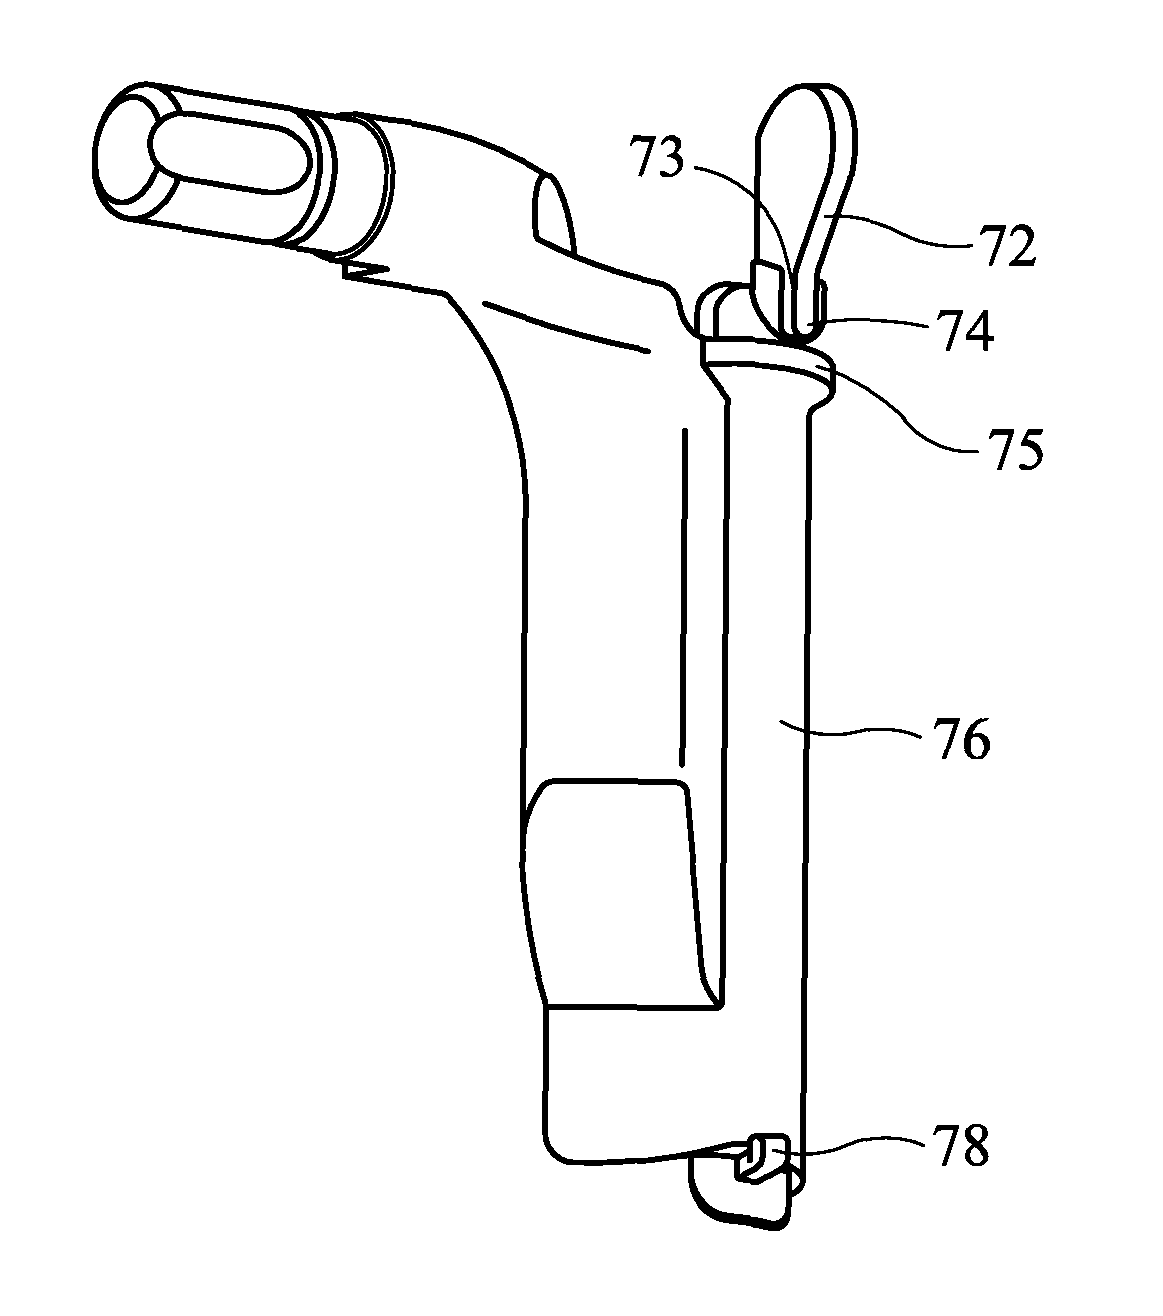 Retractor extensions and methods of use